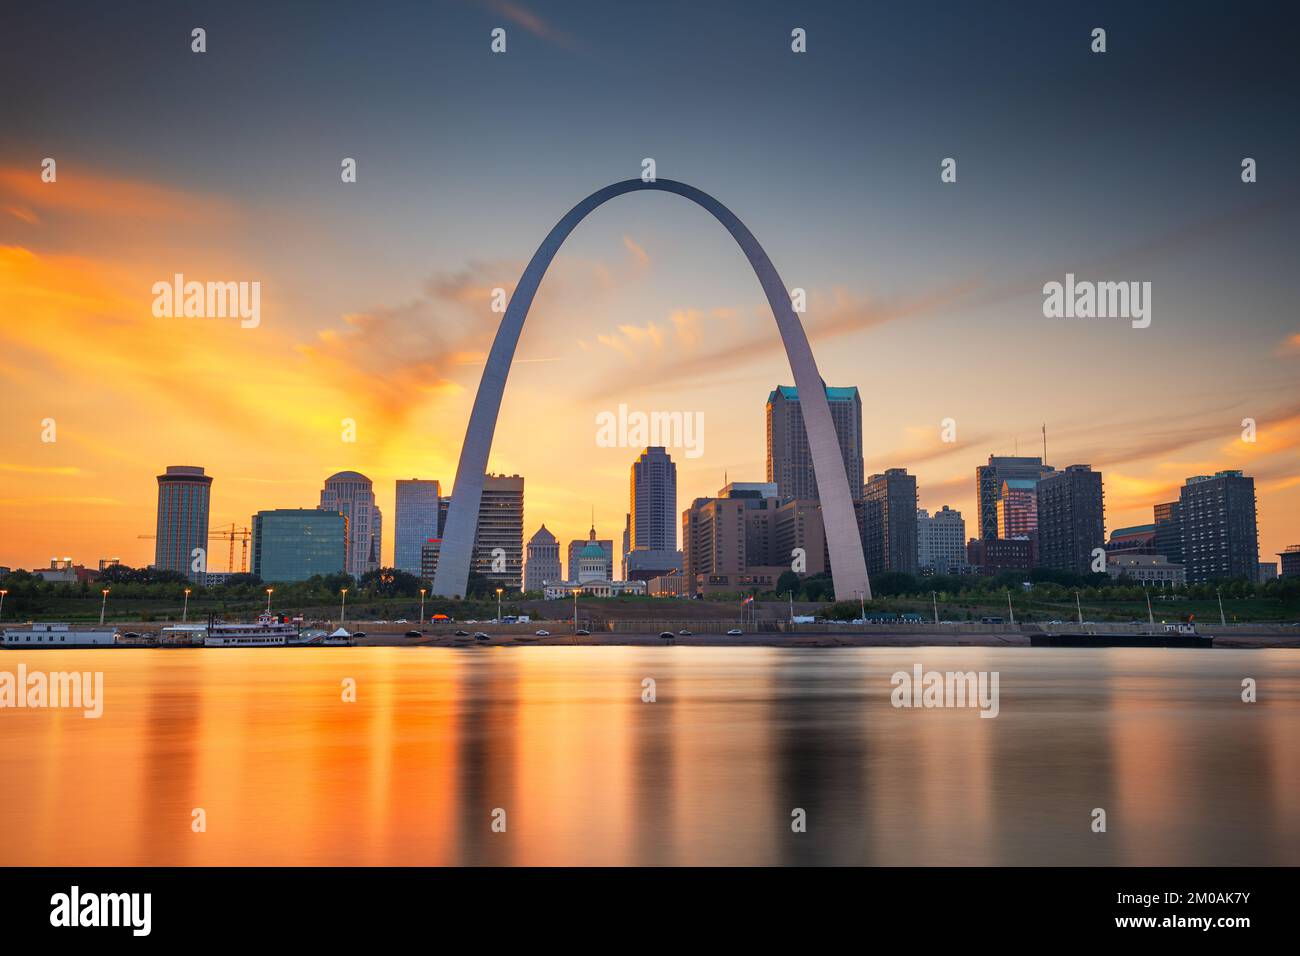 St. Louis, Missouri, USA downtown cityscape on the Mississippi River at dusk. Stock Photo